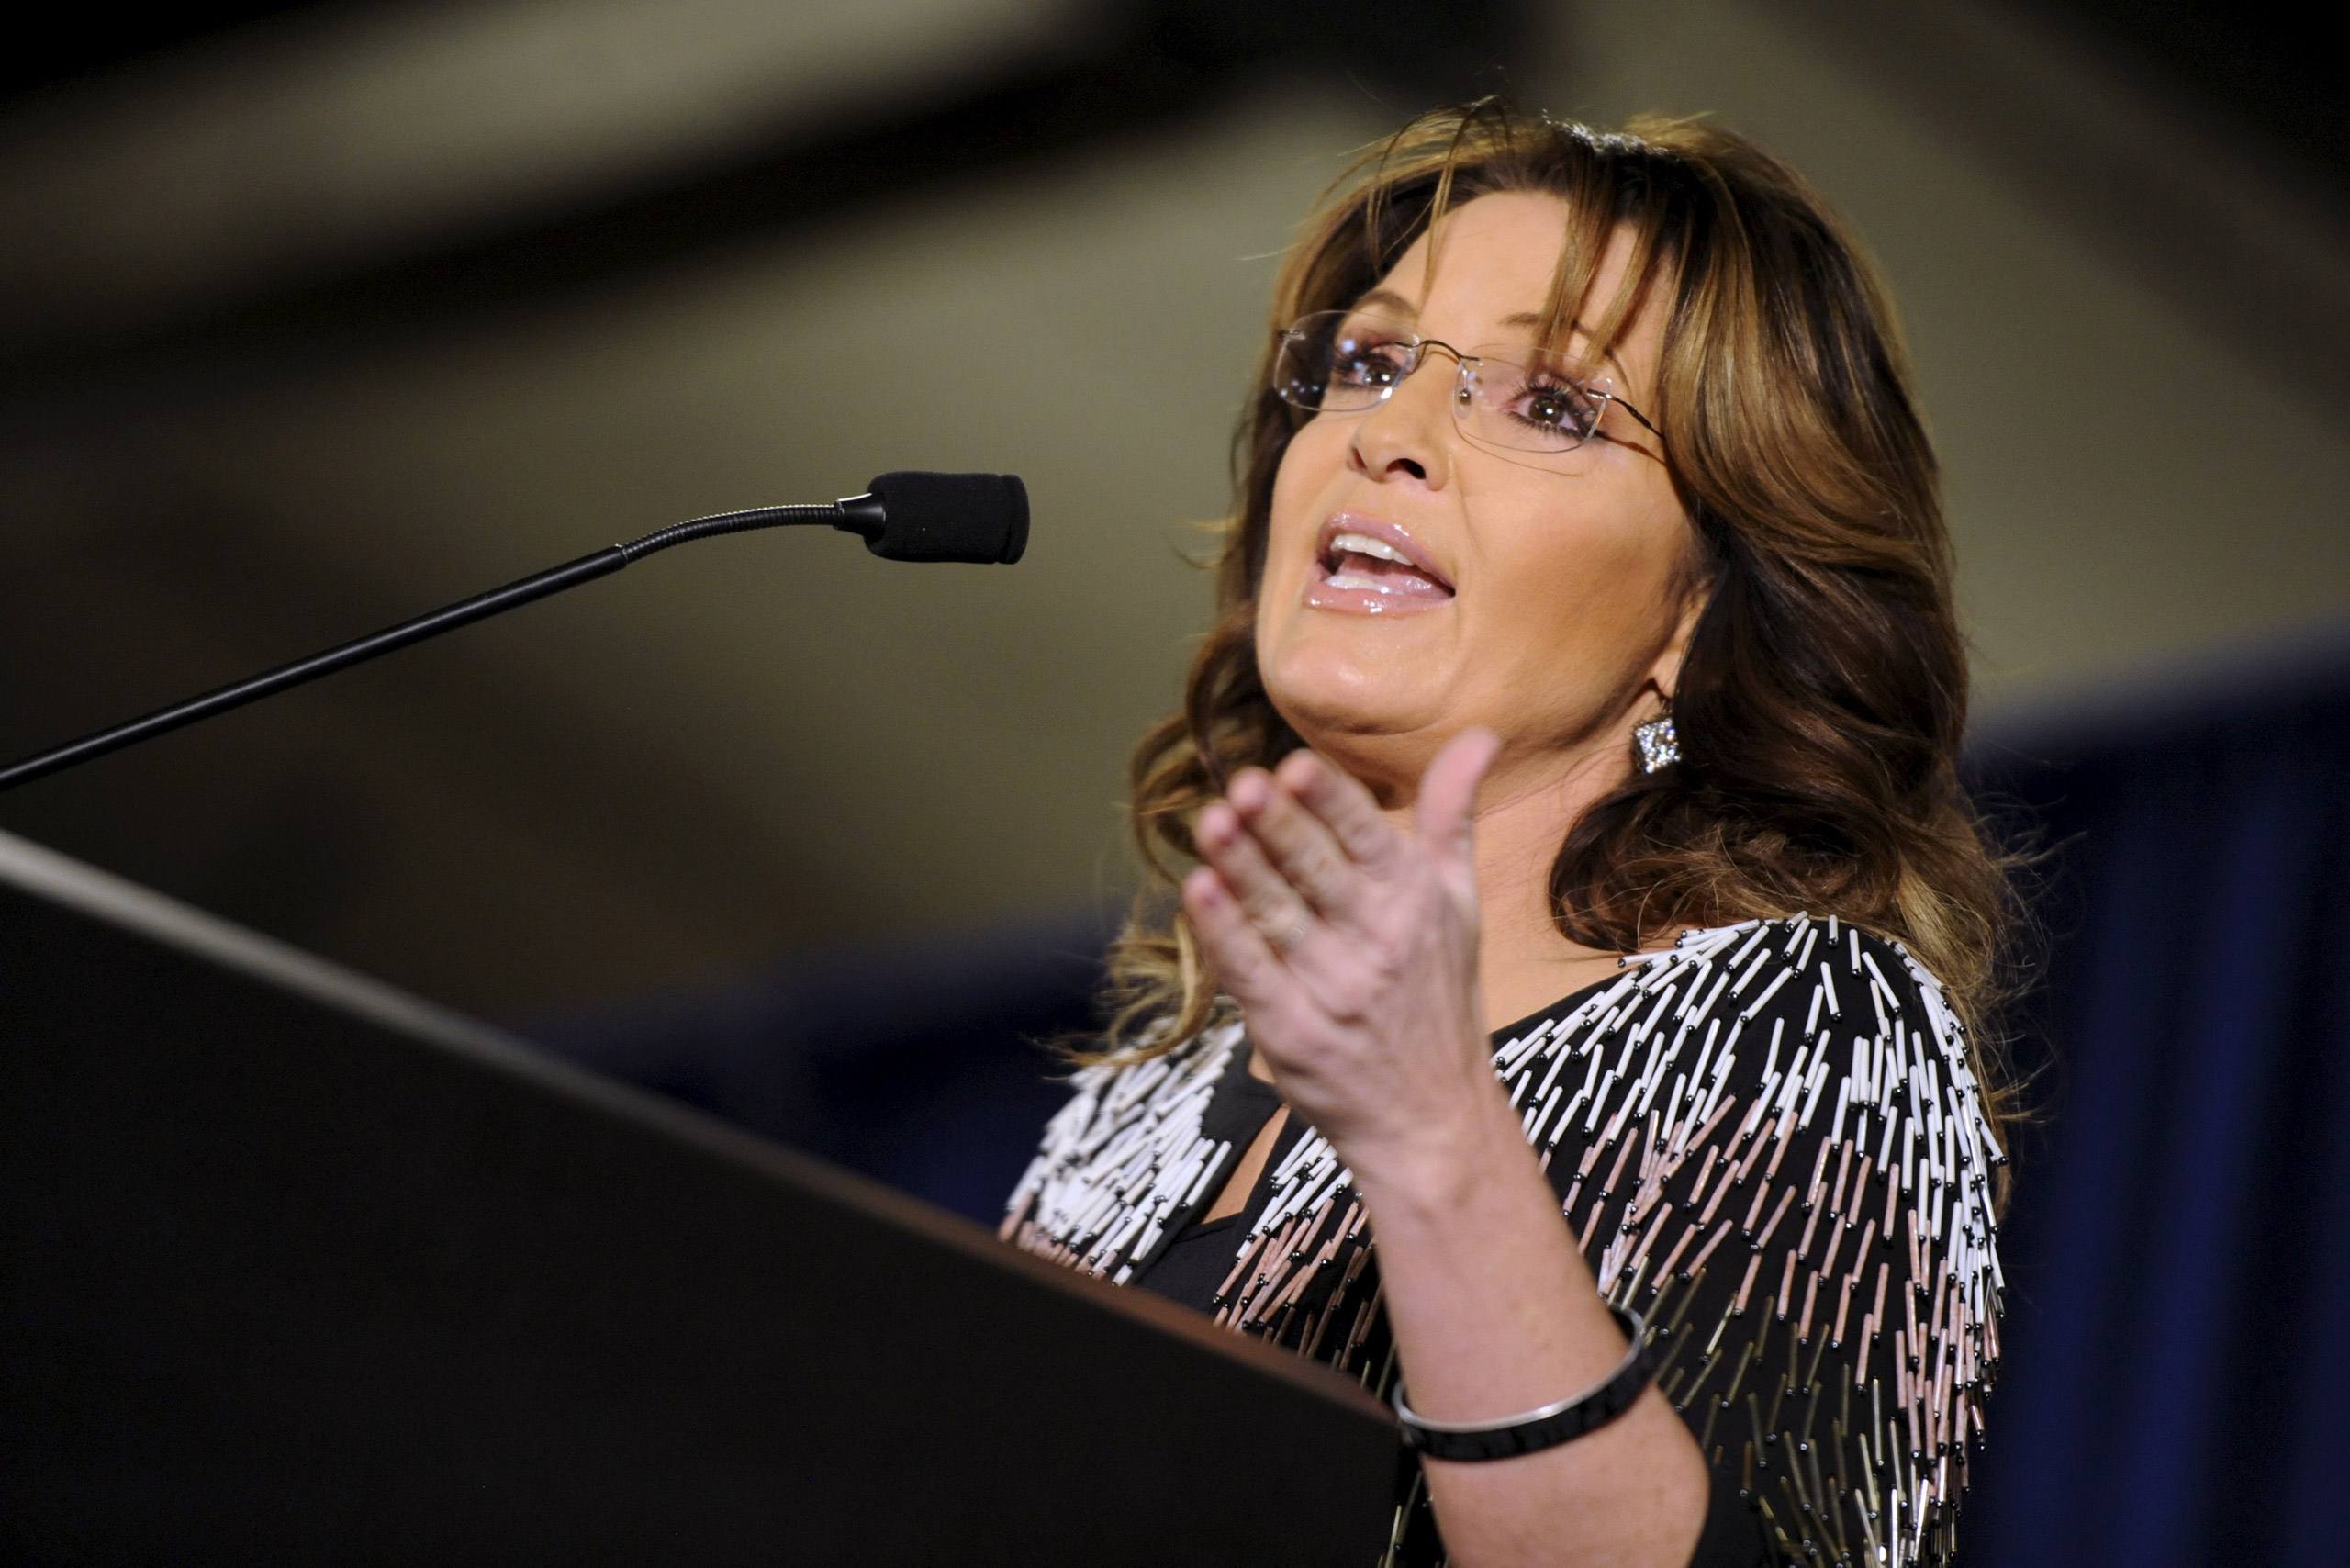 Sarah Palin speaks at a rally endorsing U.S. Republican presidential candidate Donald Trump for President at Iowa State University in Ames, Iowa, on Jan.19, 2016. (Mark Kauzlarich—Reuters)